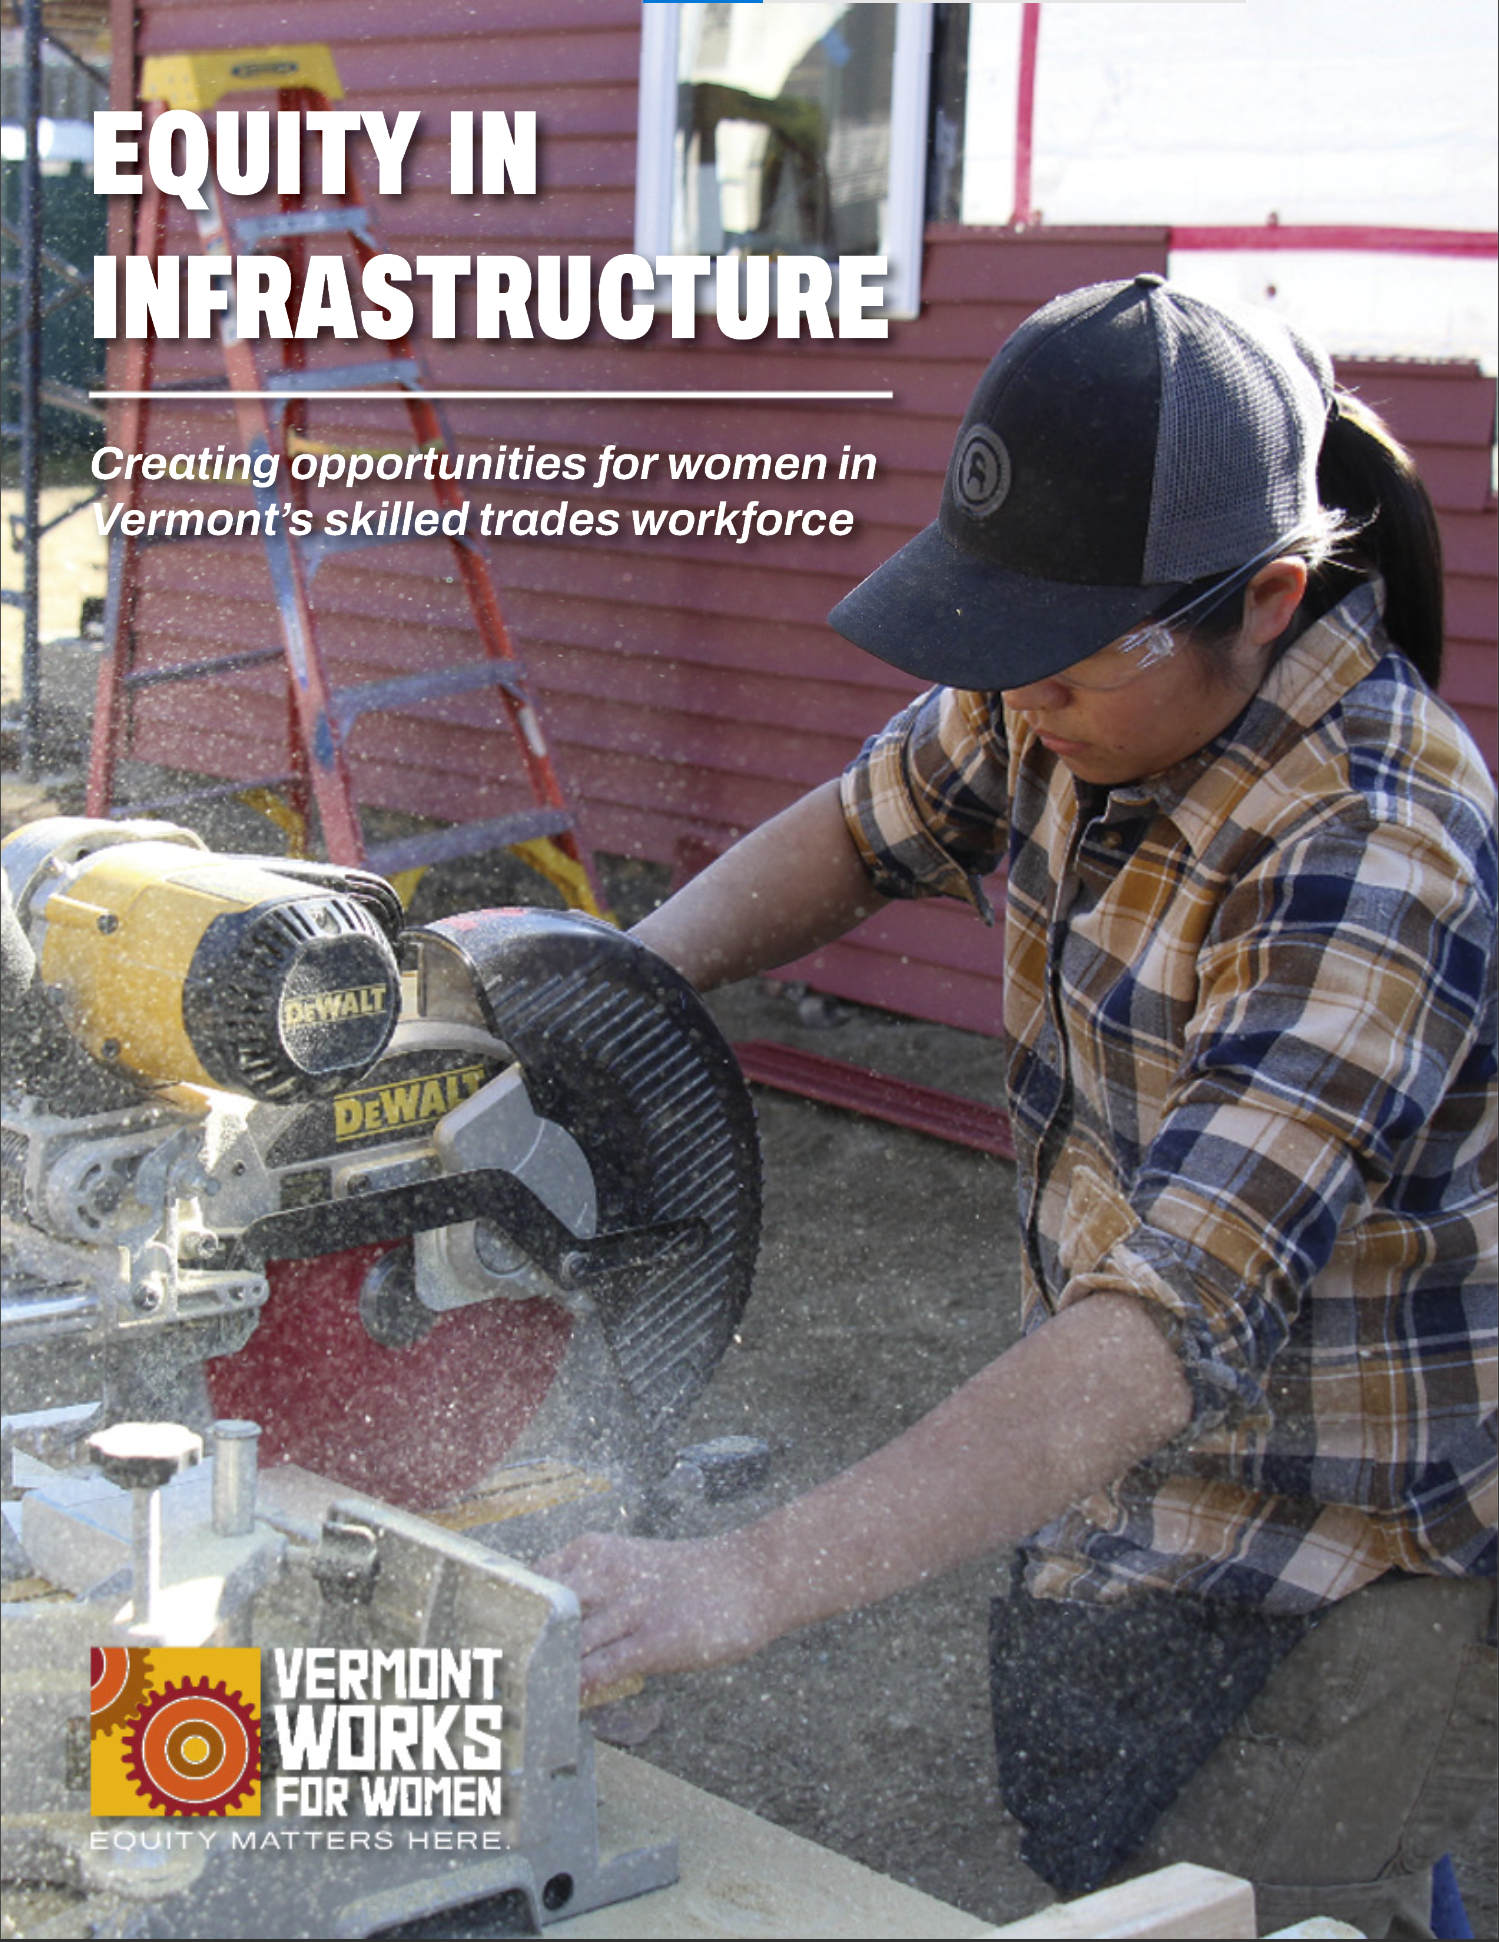 Vermont Works for Women's Equity in Infrastructure framework front cover. VWW is advocating for equity in the skilled trades workforce.